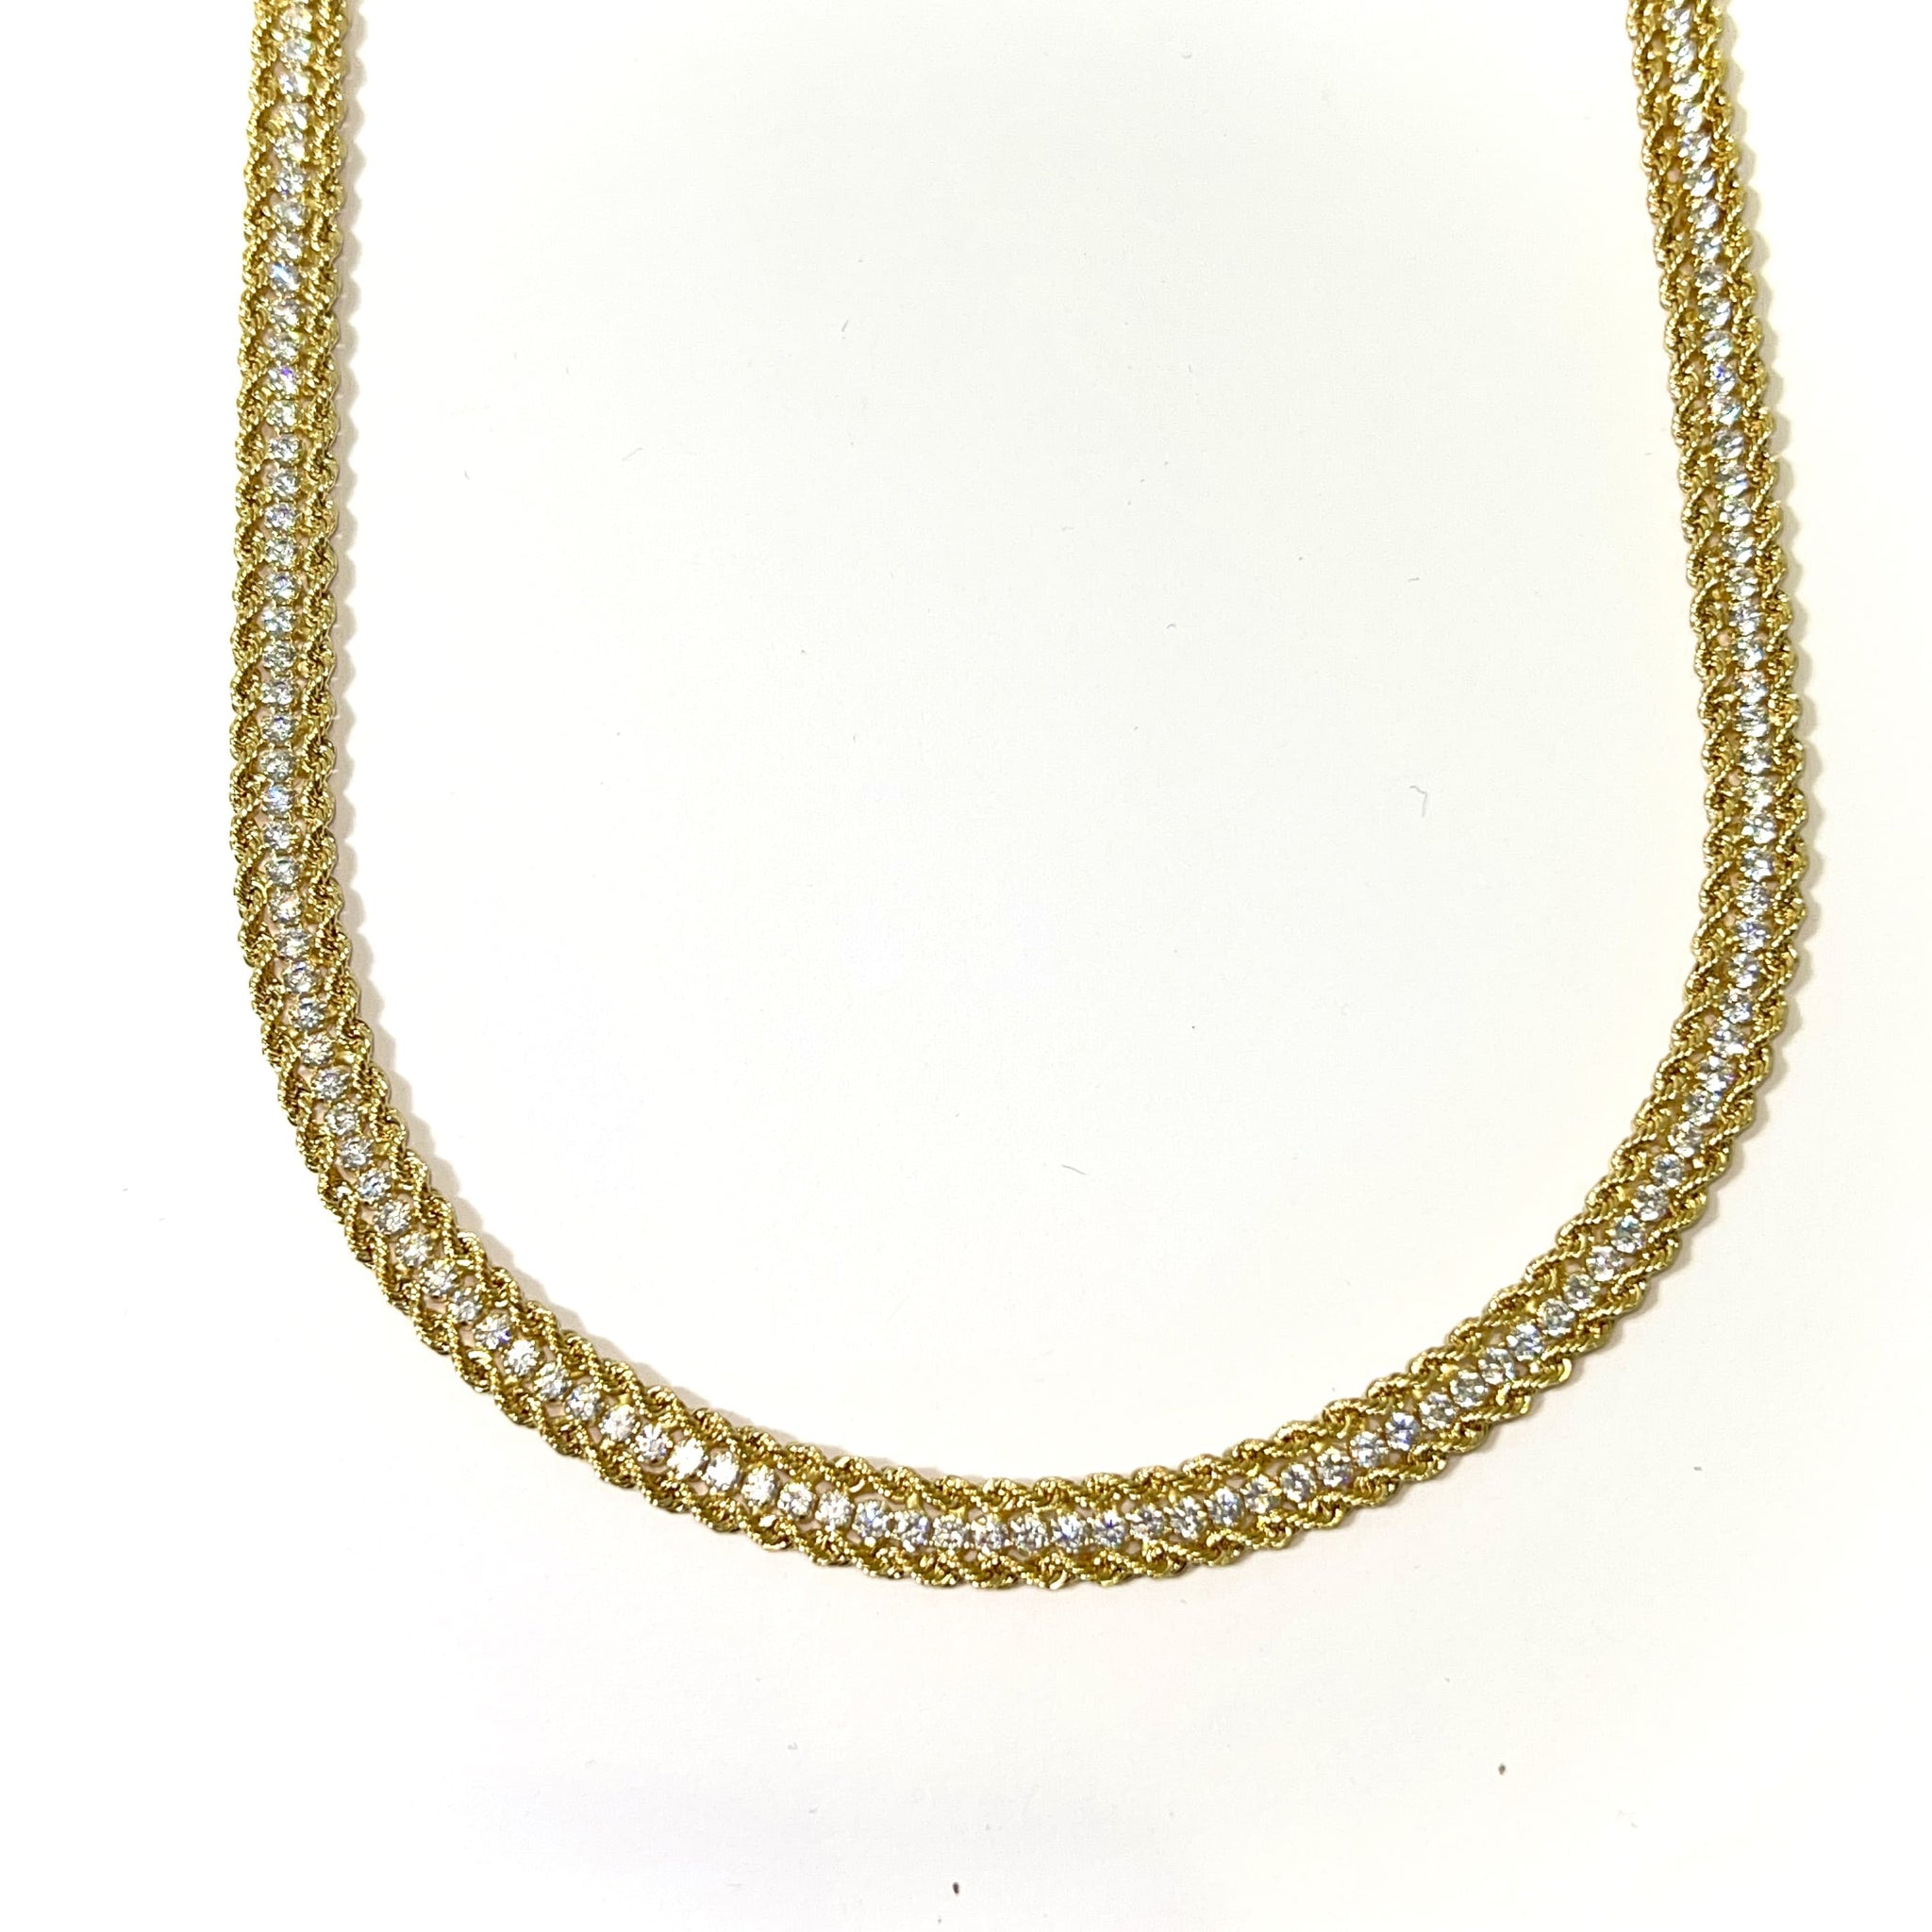 Rope Chain - 18 Carat Gold - 45cm / 7mm - 303